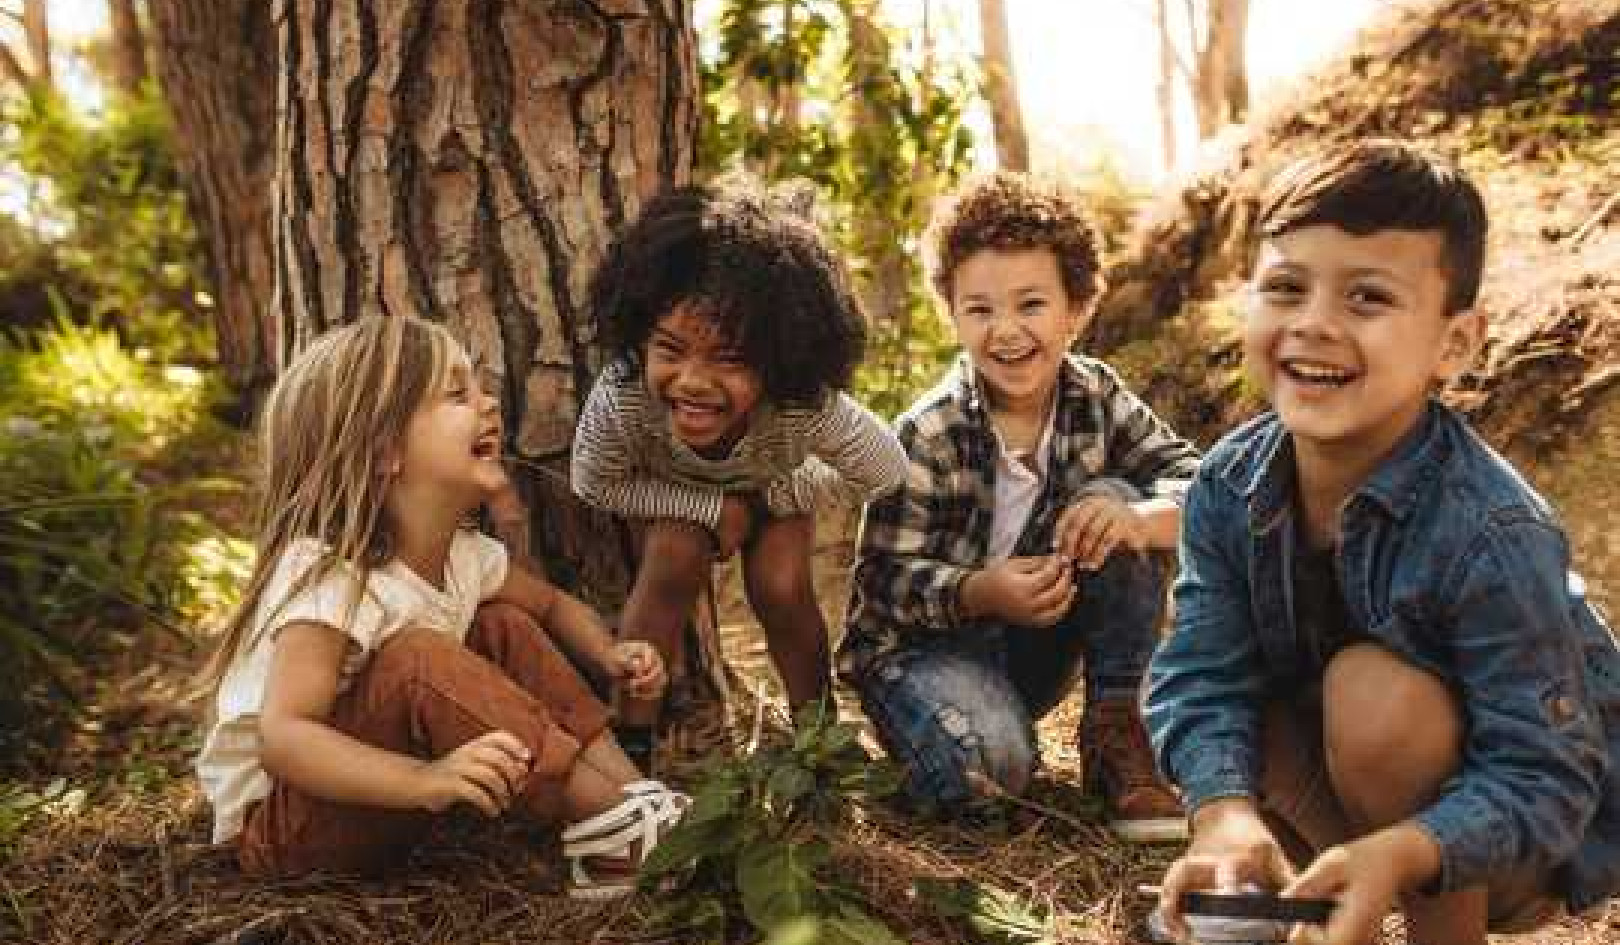 How Climbing Trees And Making Dens Can Help Children Develop Resilience